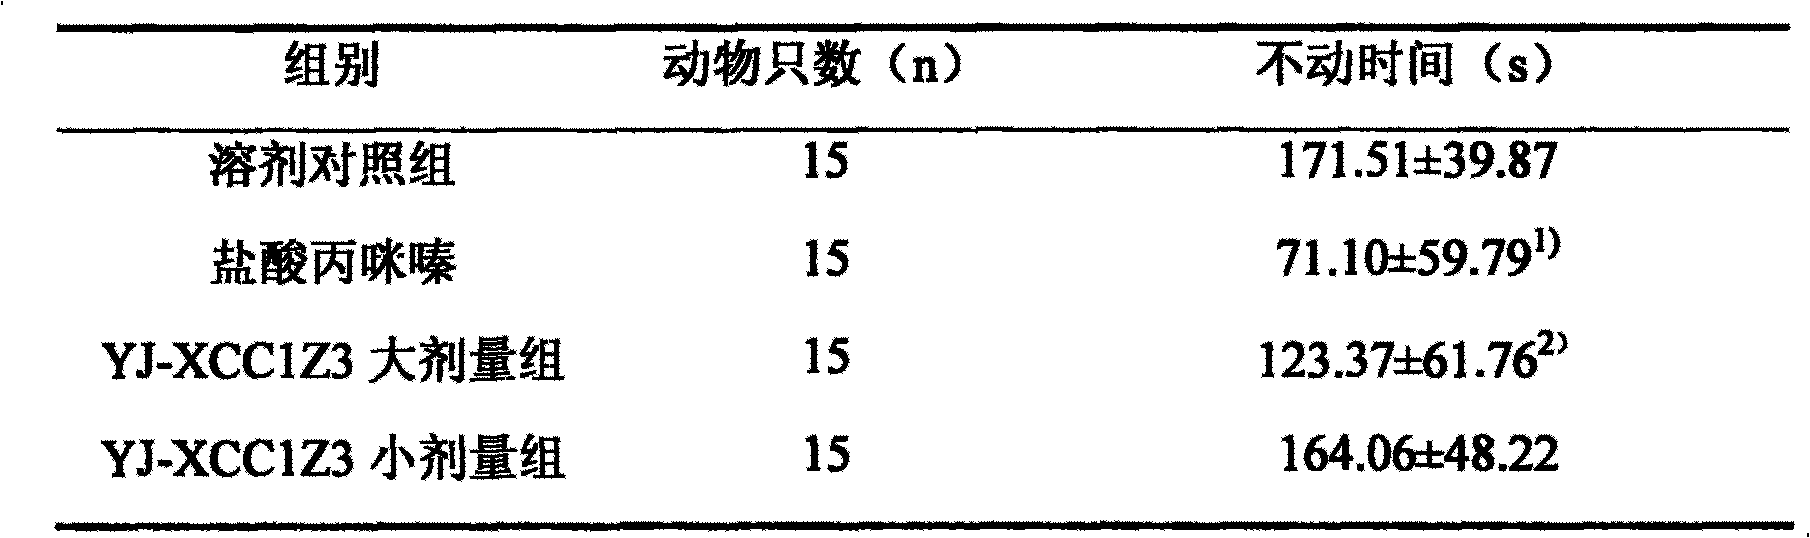 Anti-depression medicament as well as preparation method and application thereof